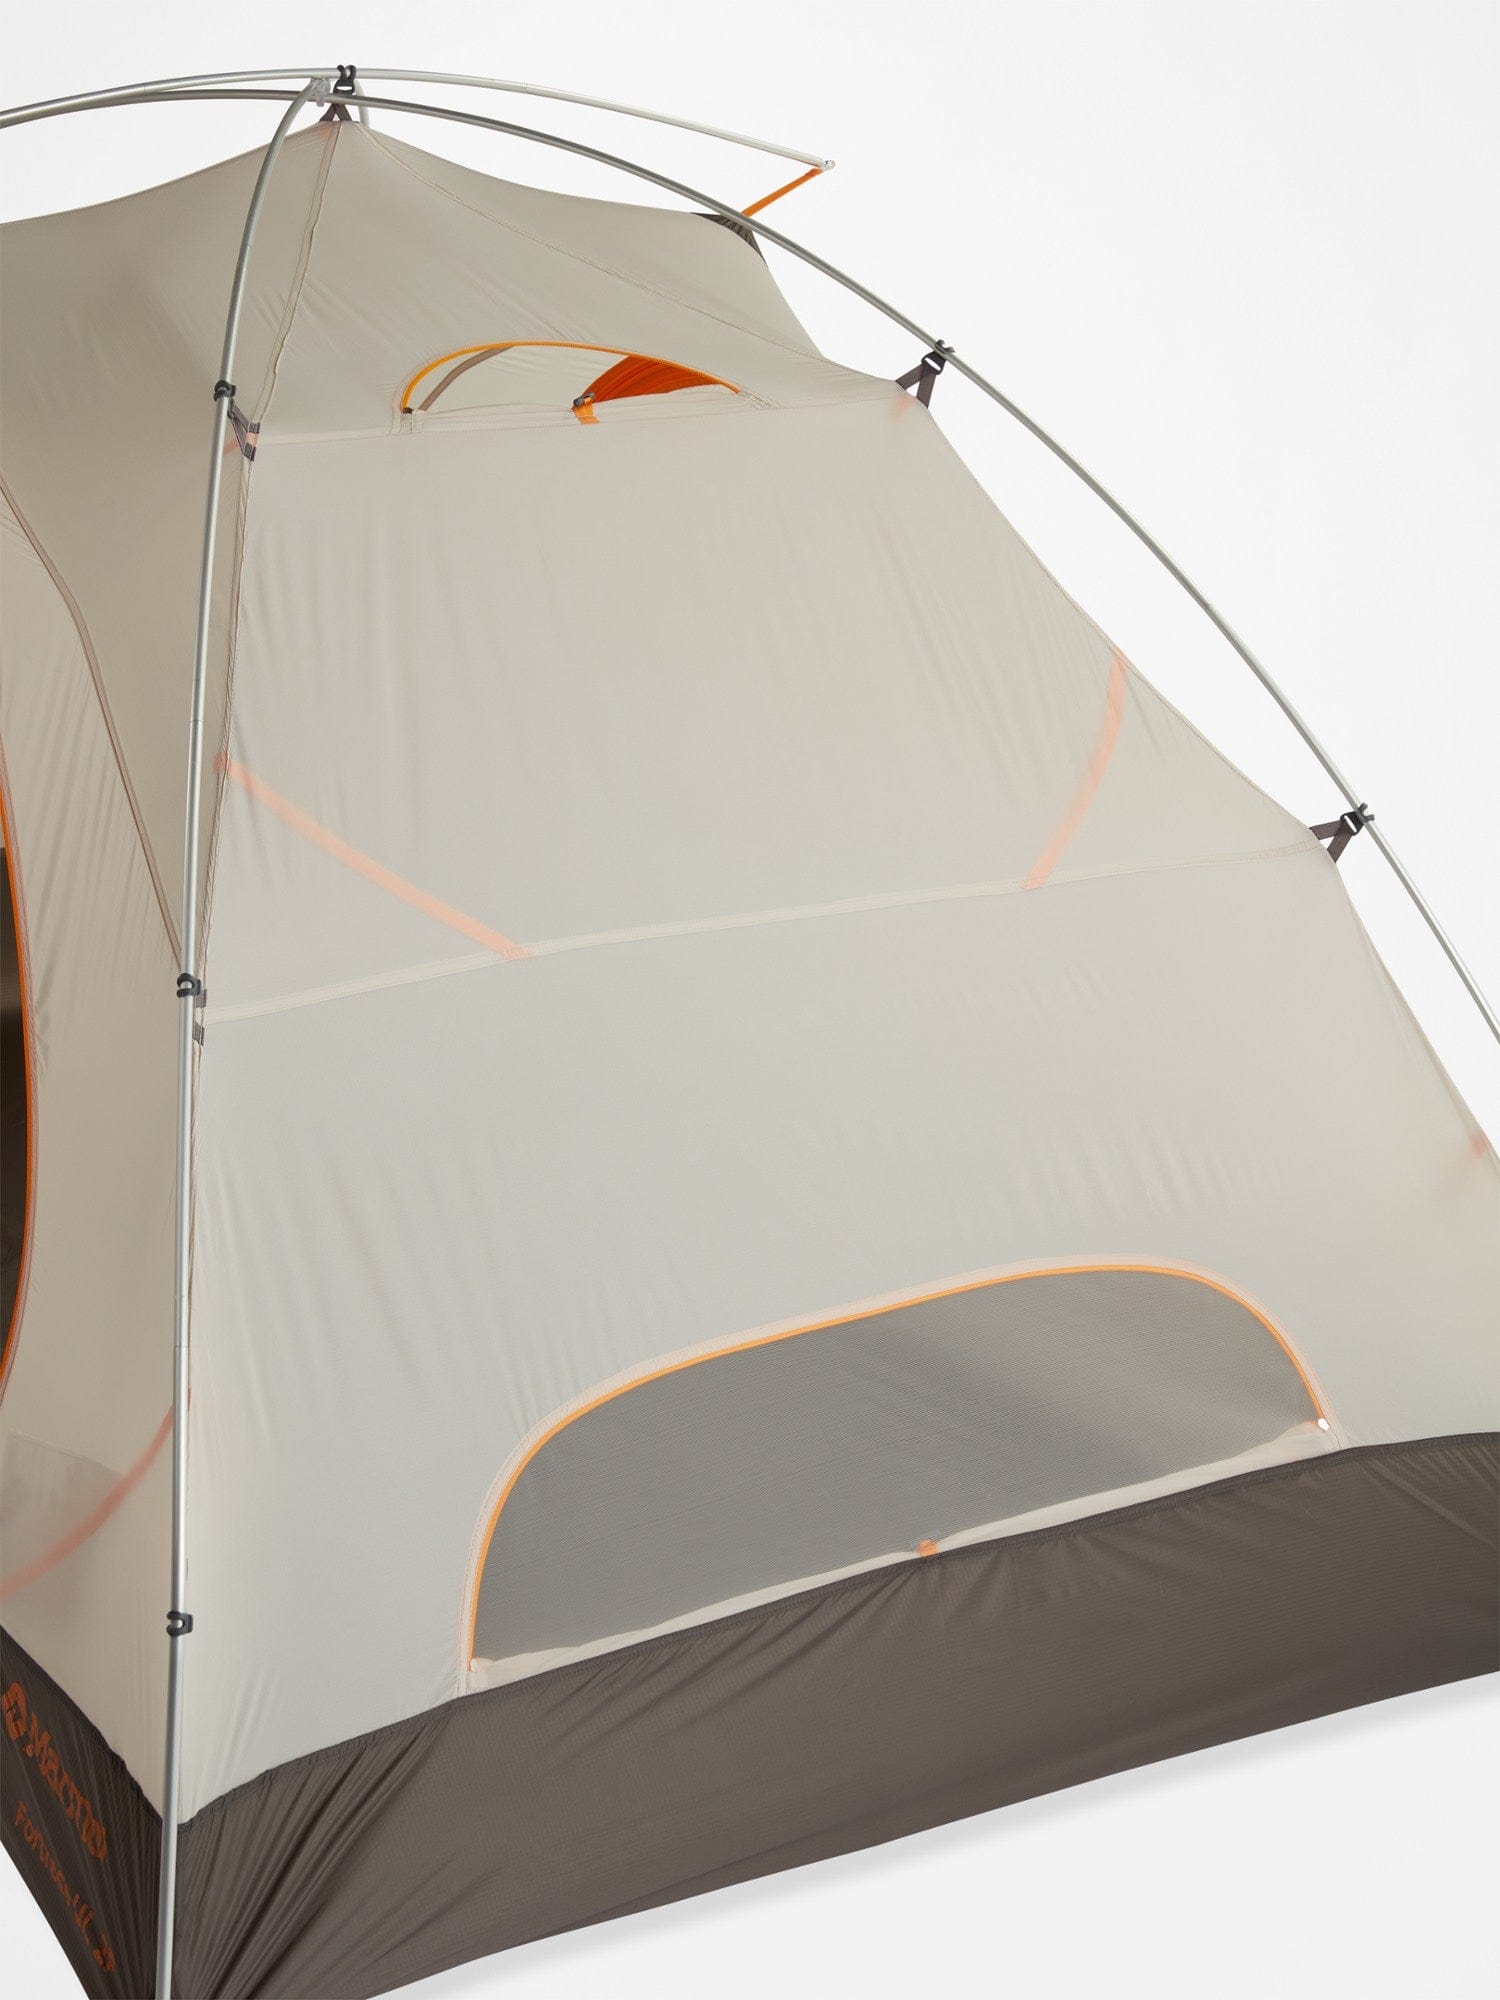 Marmot Tent 2P Fortress UL Tent 31810-1440-ONE